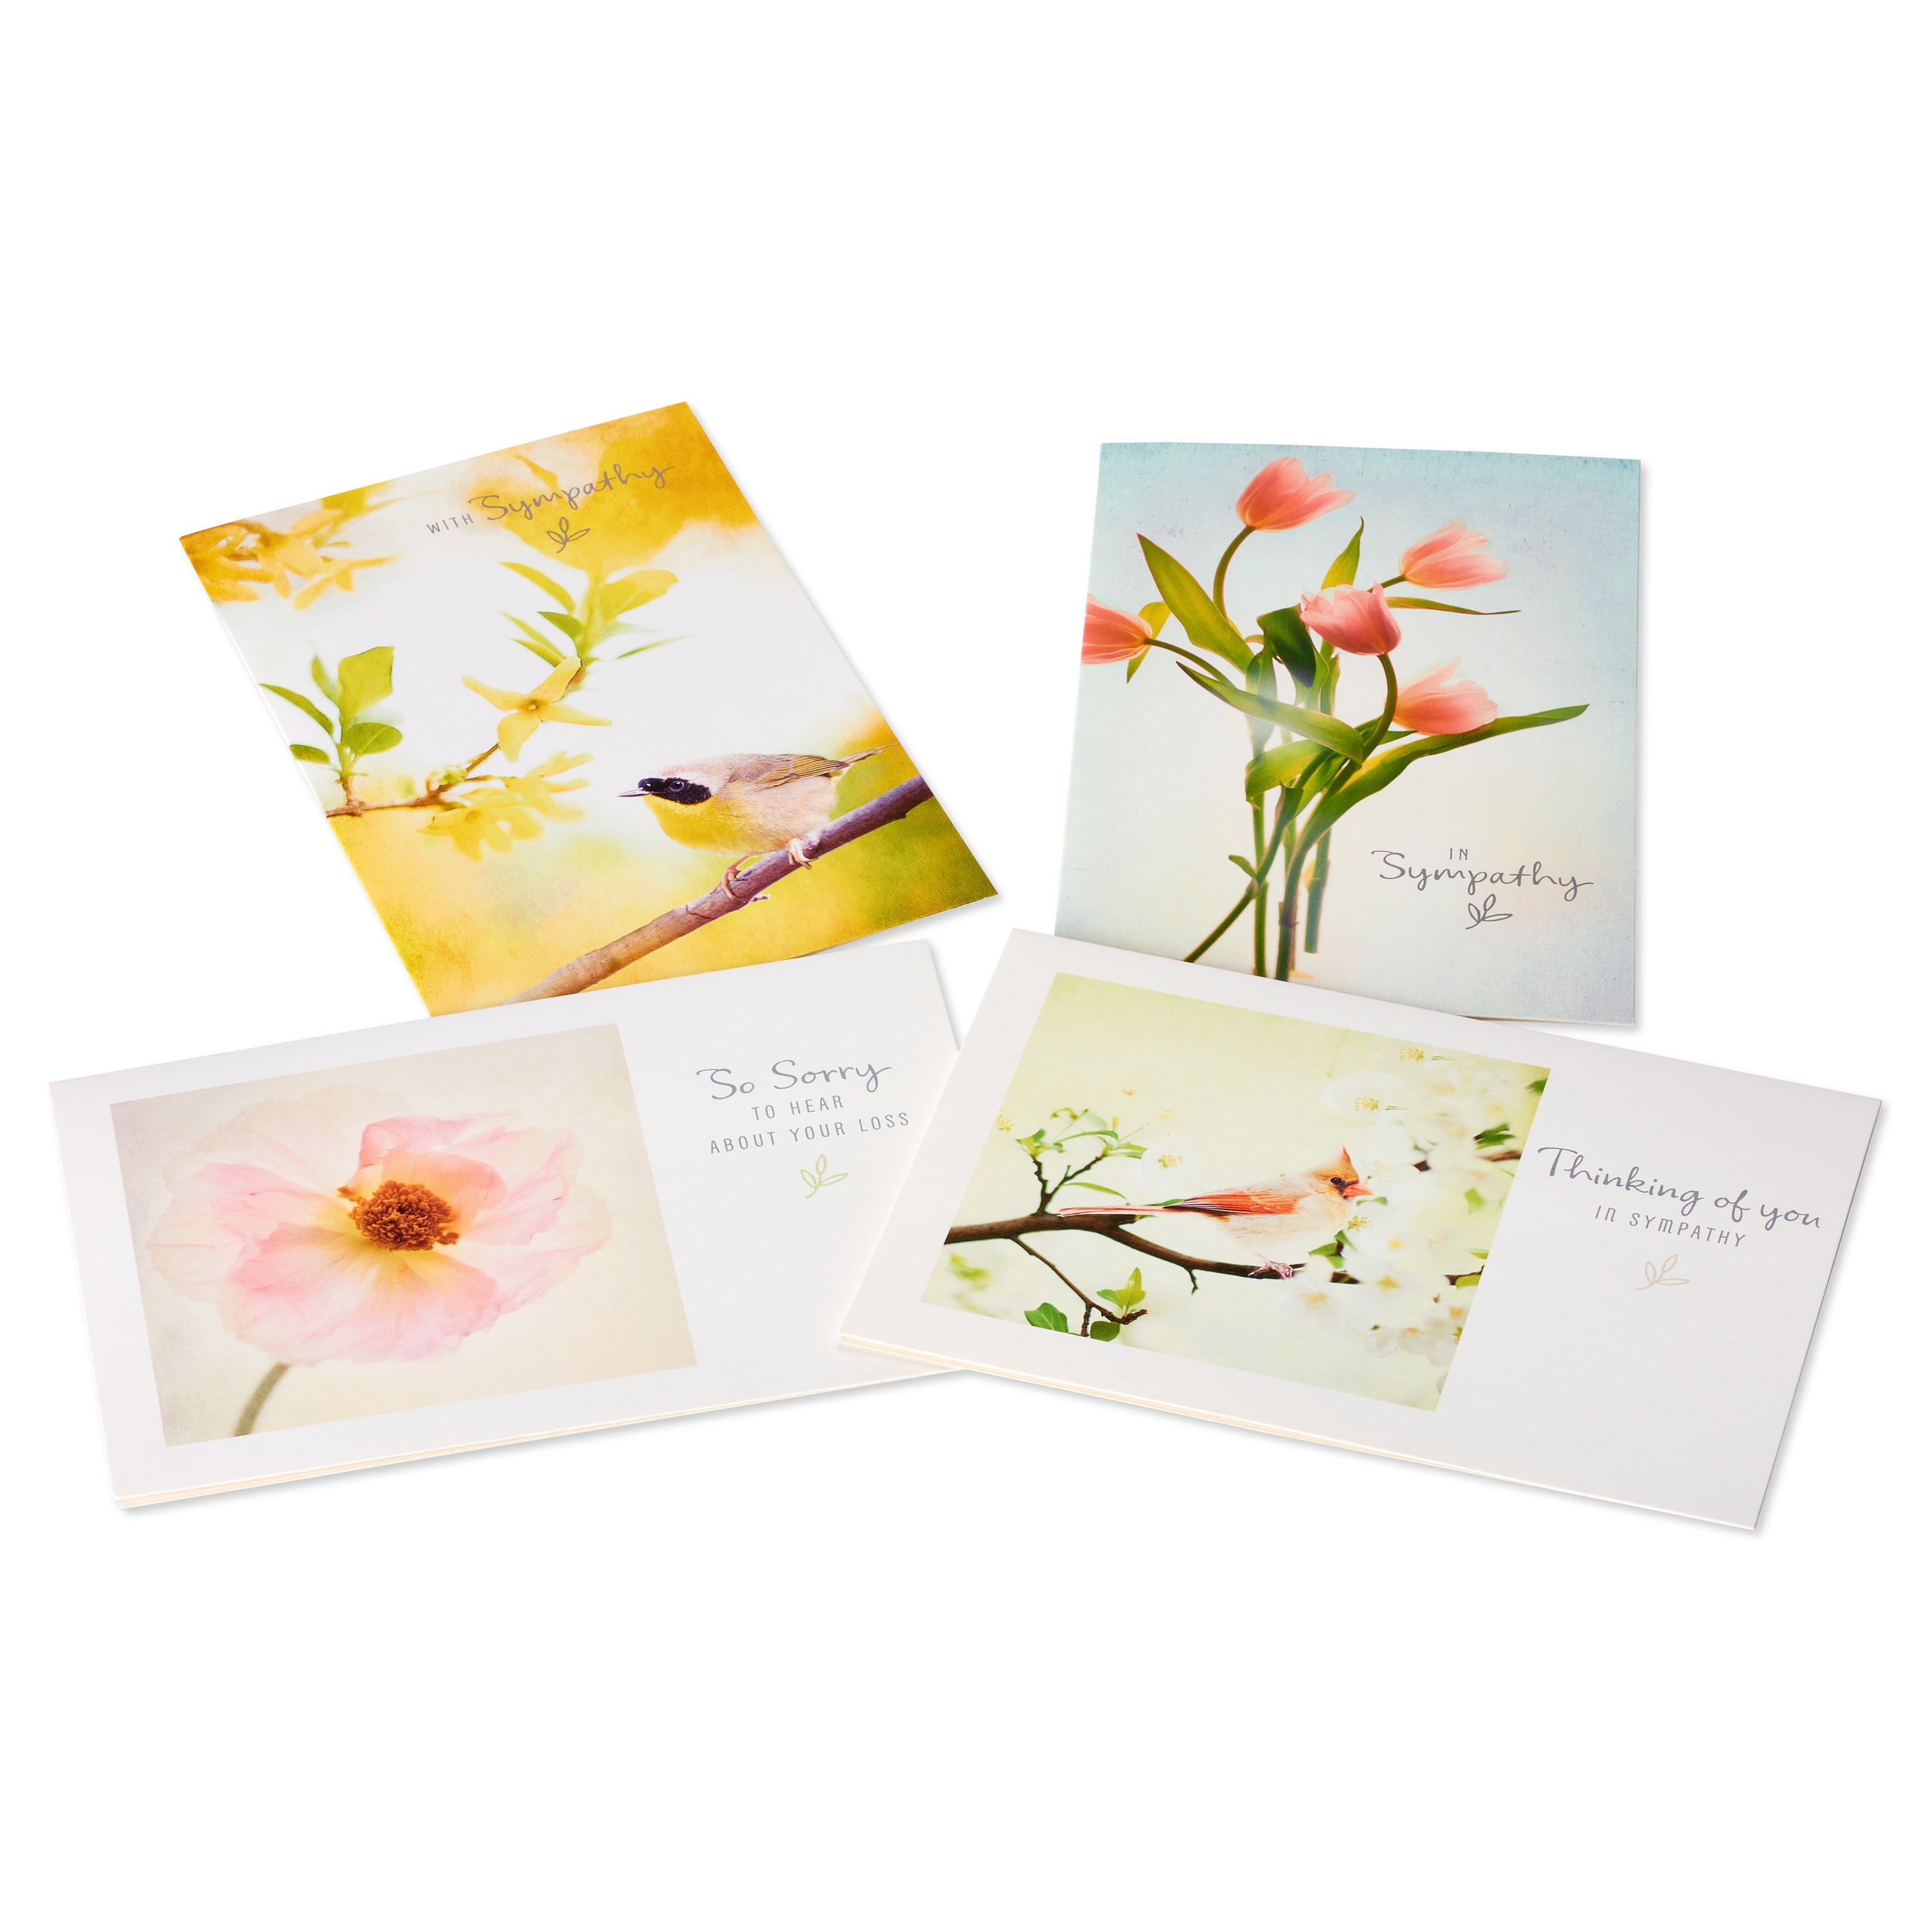 Details about   With Sympathy Greeting Card w/Envelope NEW 